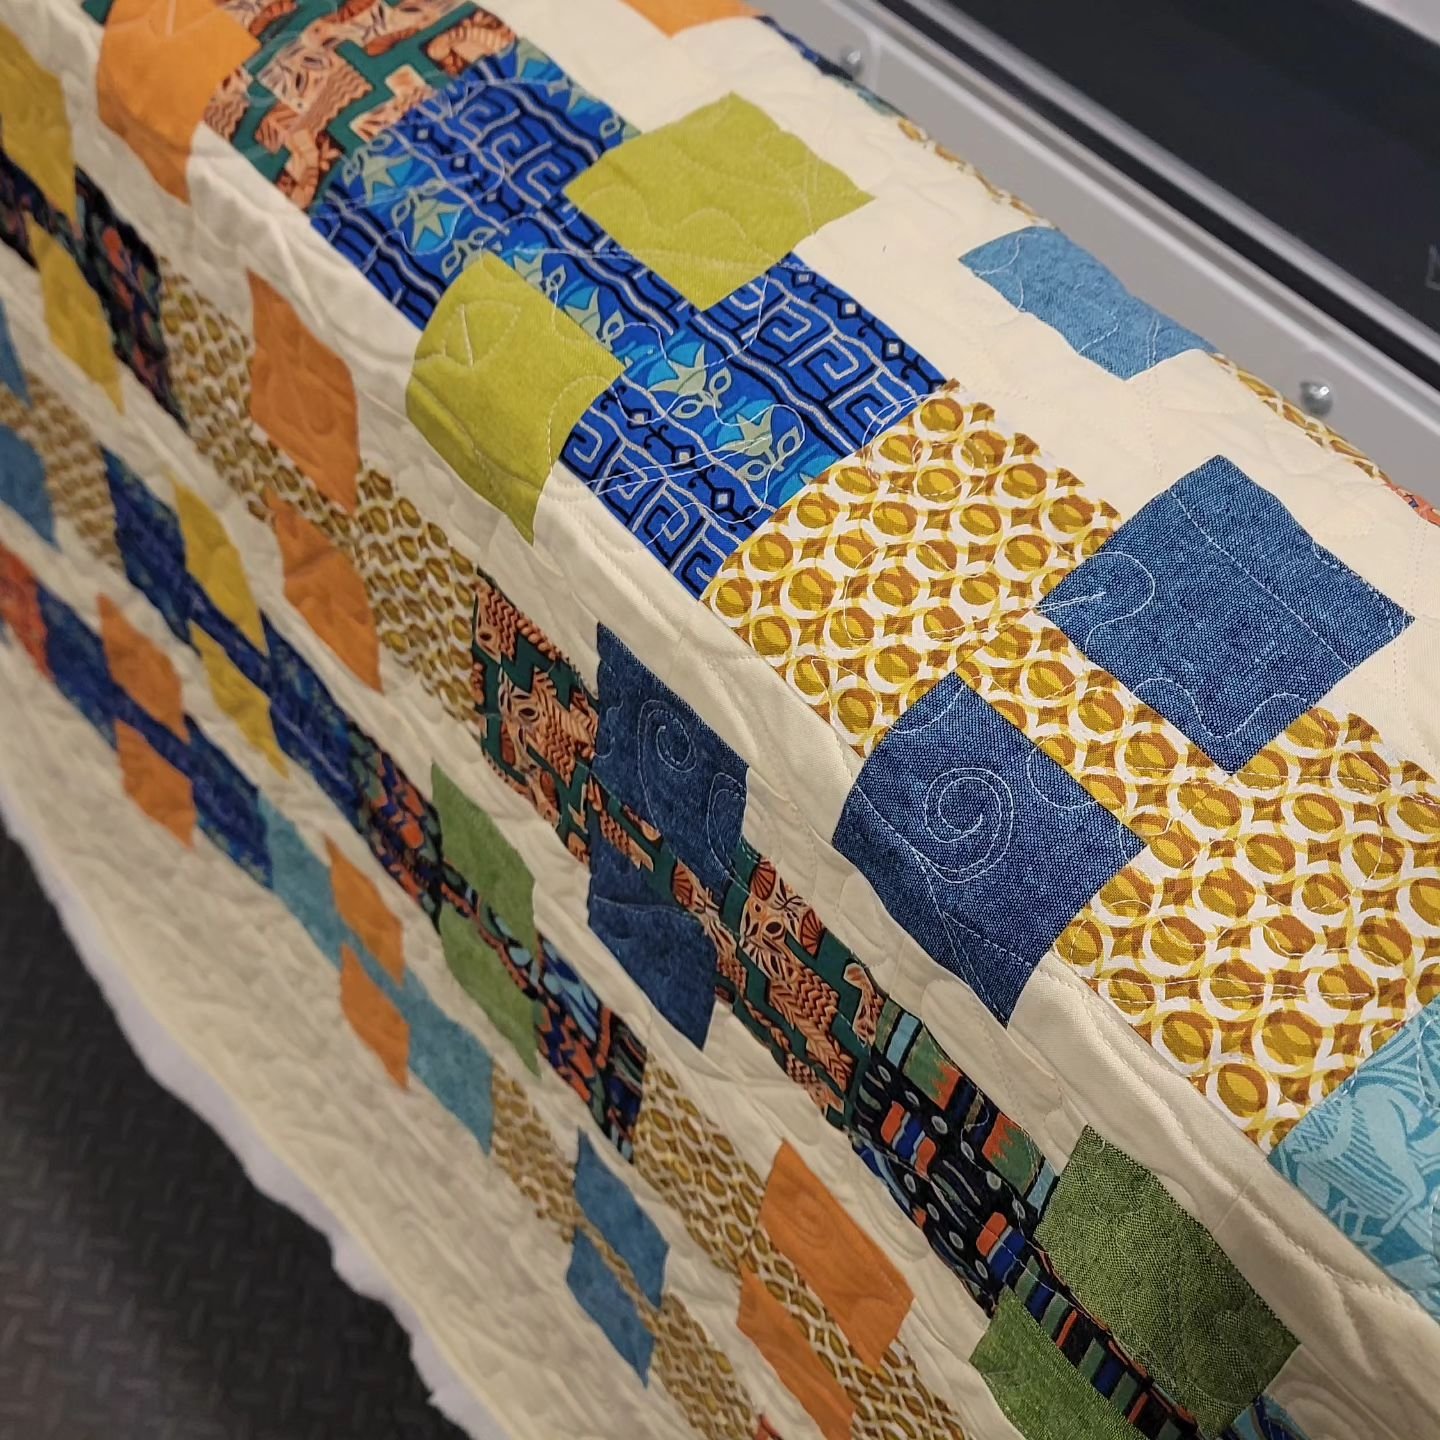 Done with quilting! Now onto binding!